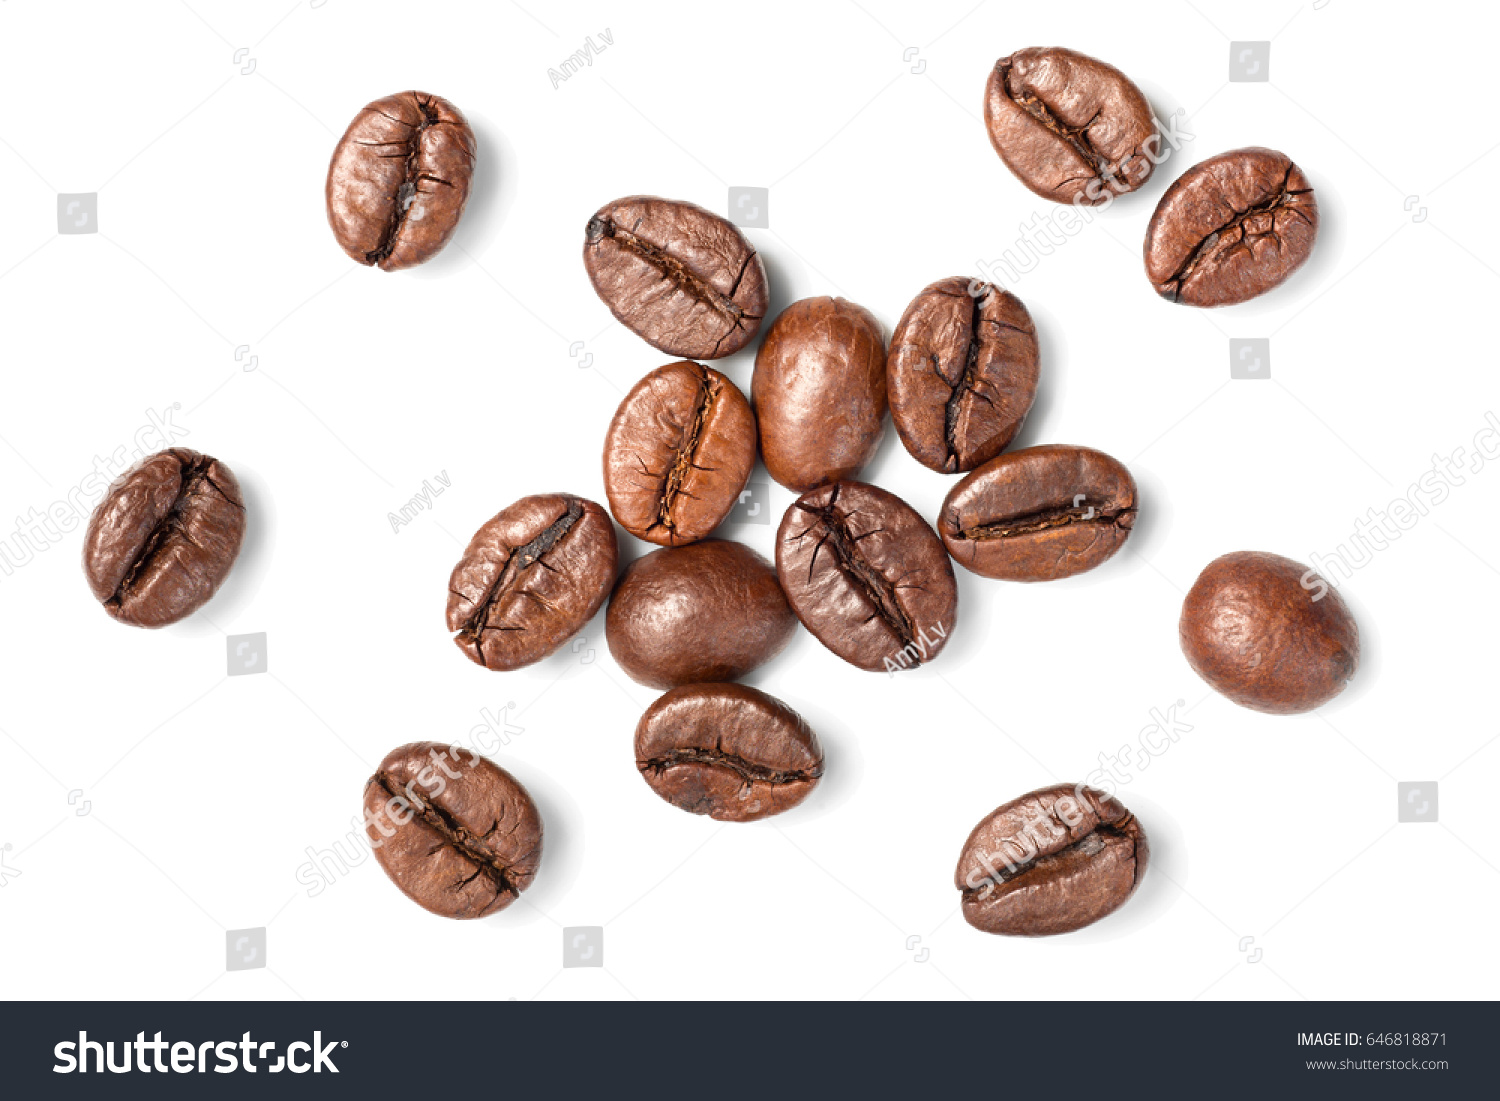 roasted coffee beans on white, top view #646818871